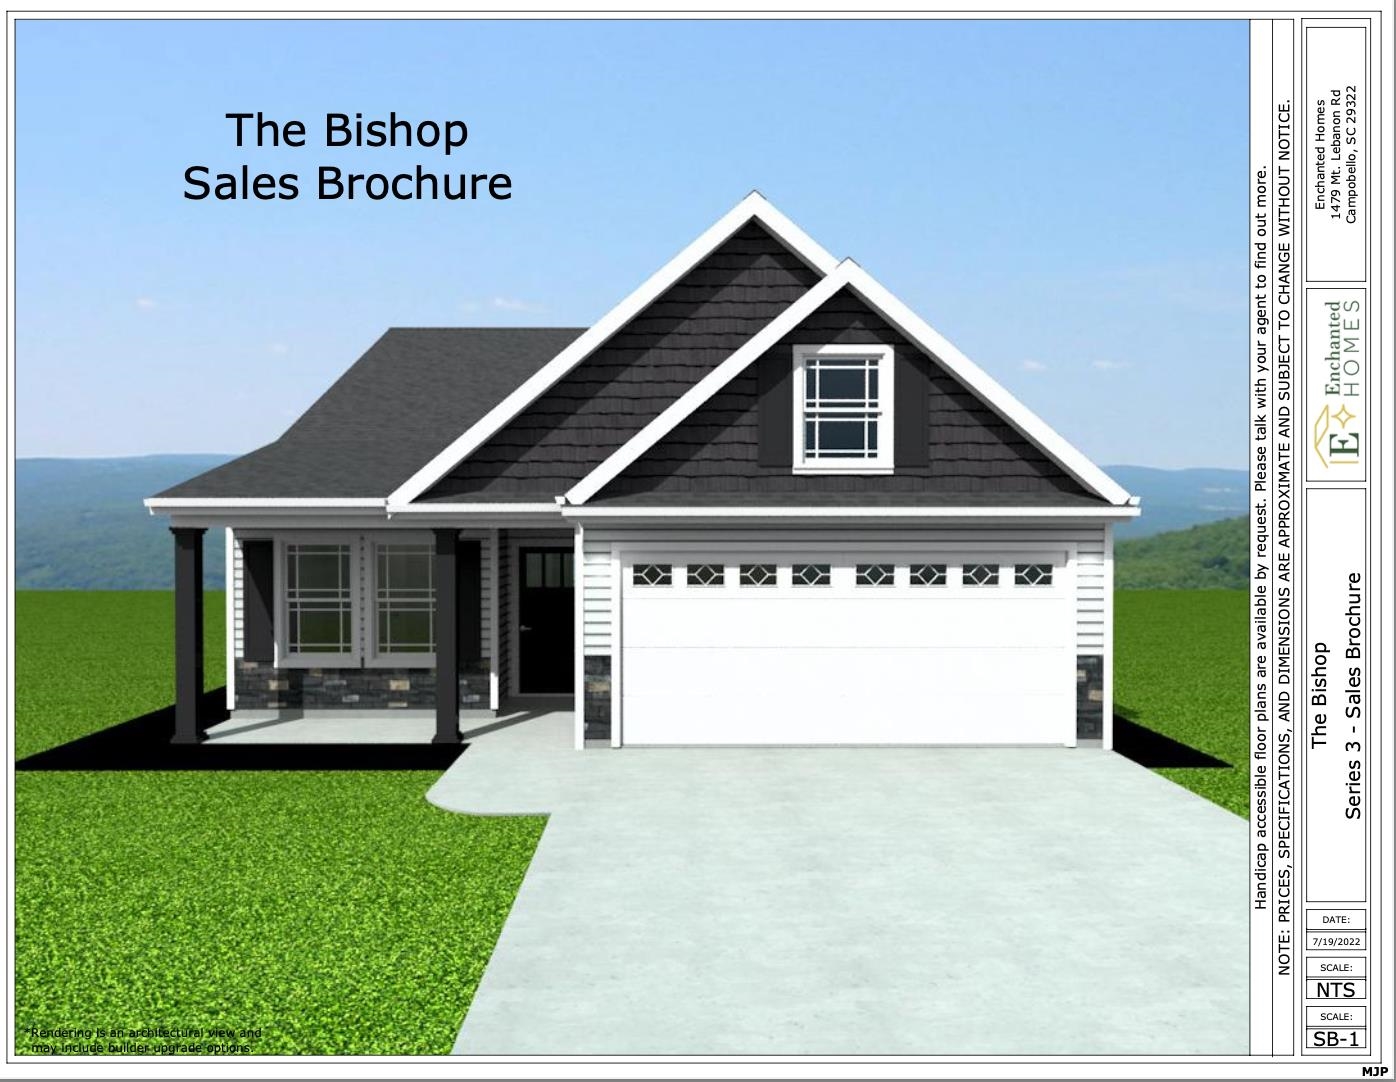 The BISHOP plan (Lot 4) has a spacious open living area and study. Granite countertops, crown molding with rope lighting, and many more features included. 12' X 12' Covered patio and additional 10' x 12' uncovered patio overlooks the private yard. 30-year architectural shingles, site-built construction, and a 10 year limited warranty are included to give you peace of mind.  Closing cost or upgrades incentives available when working with a preferred lender and attorney!!